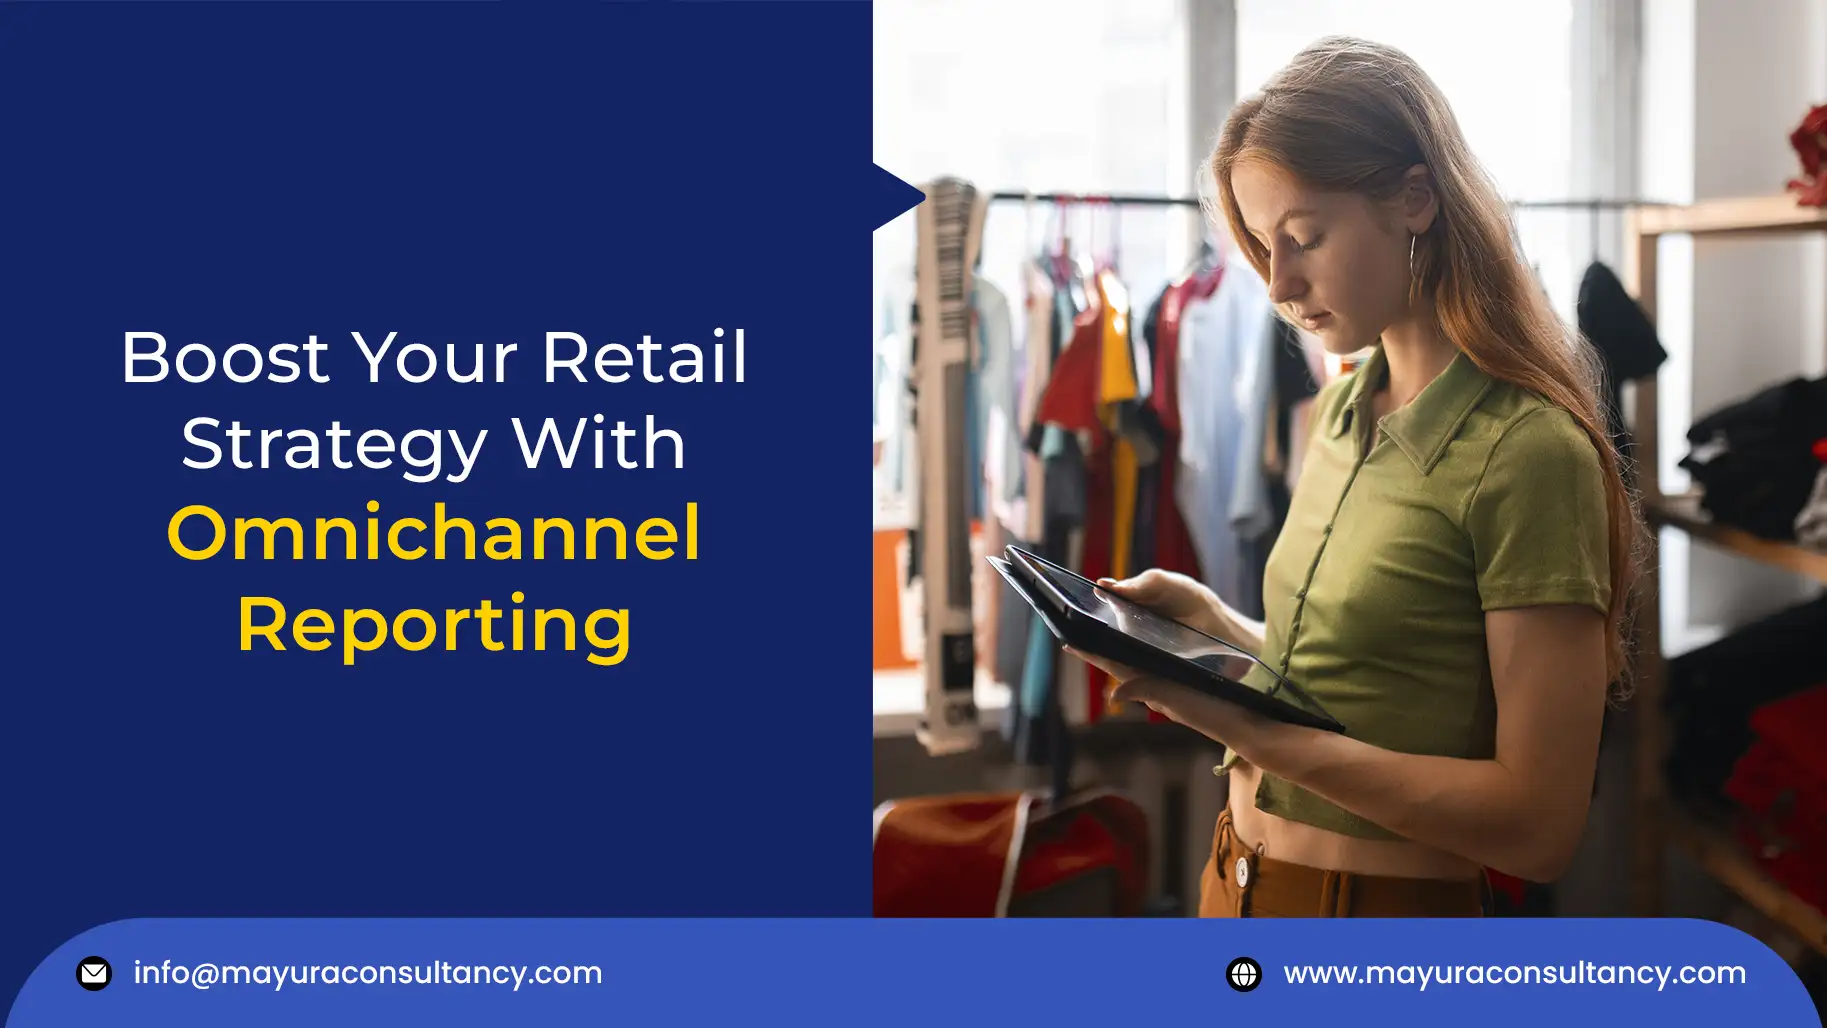 Boost your Retail Strategy with Omnichannel Reporting